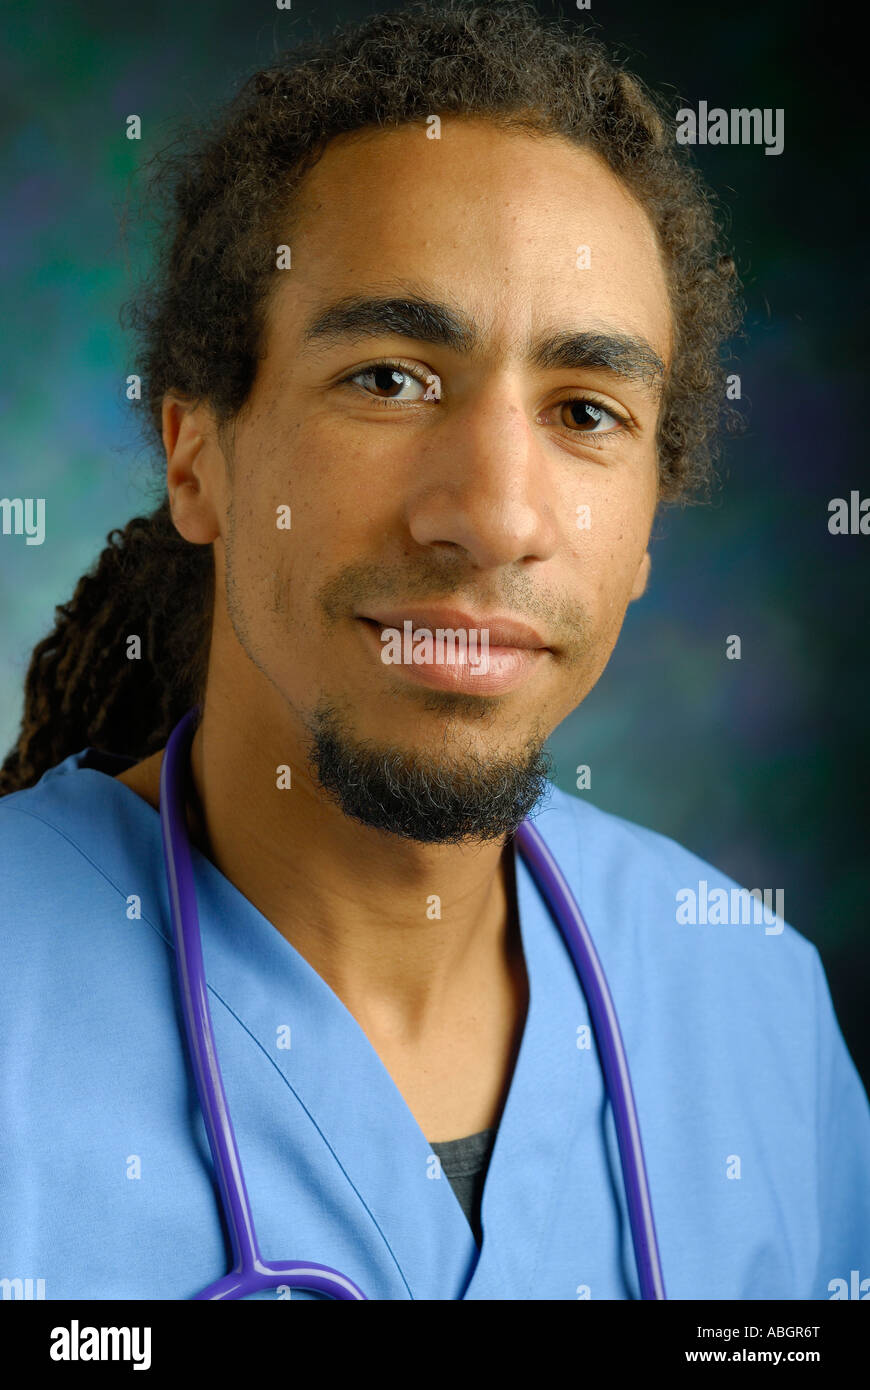 Head shot of a young black medical doctor with scrubs and stethoscope Stock  Photo - Alamy